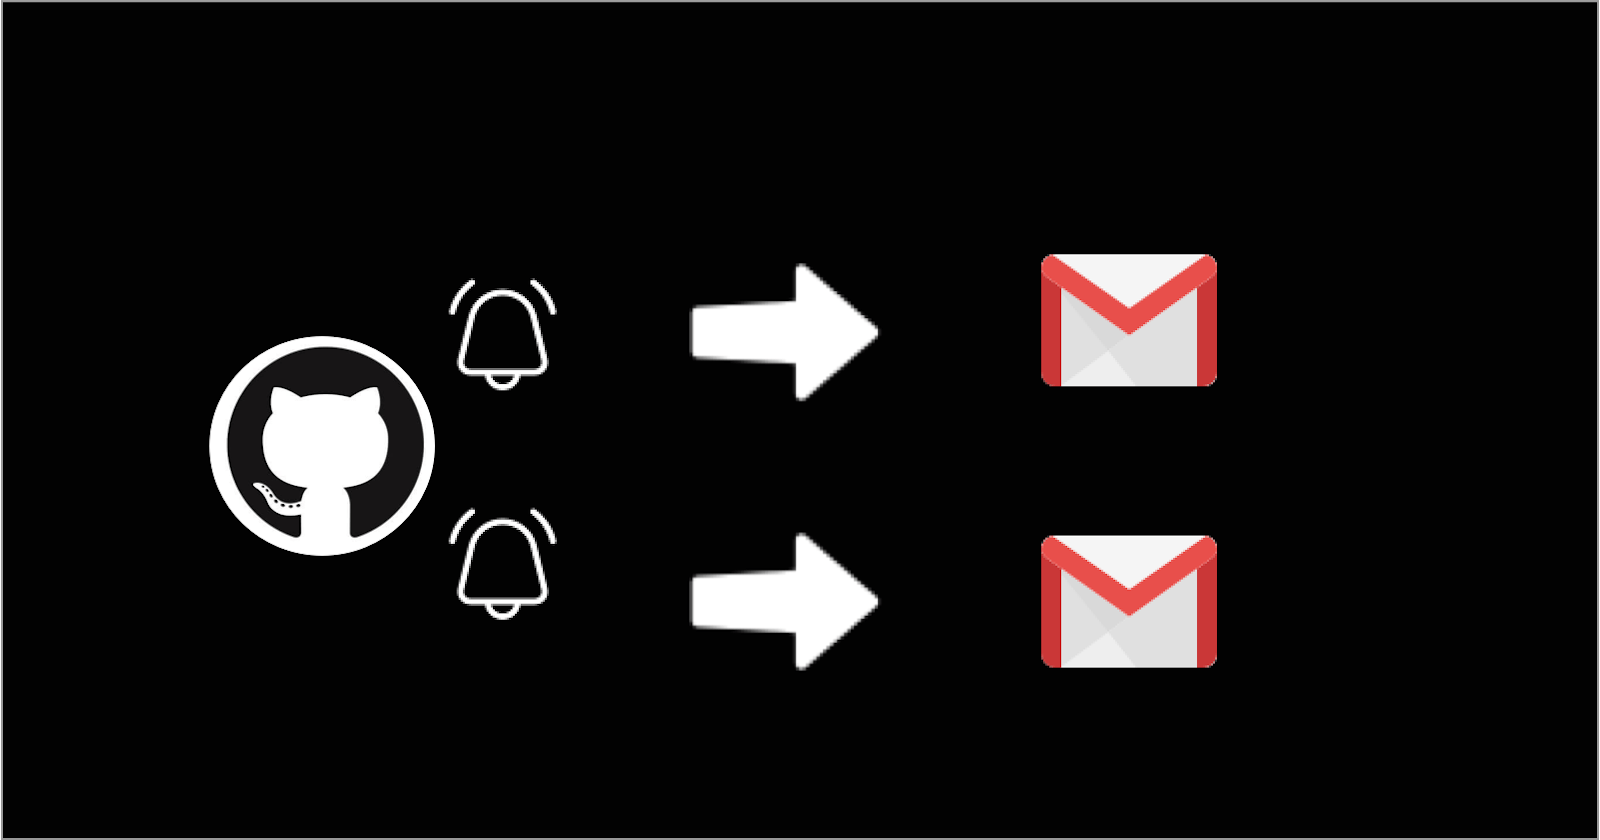 How to set different emails for notifications for private use and business use on Github.